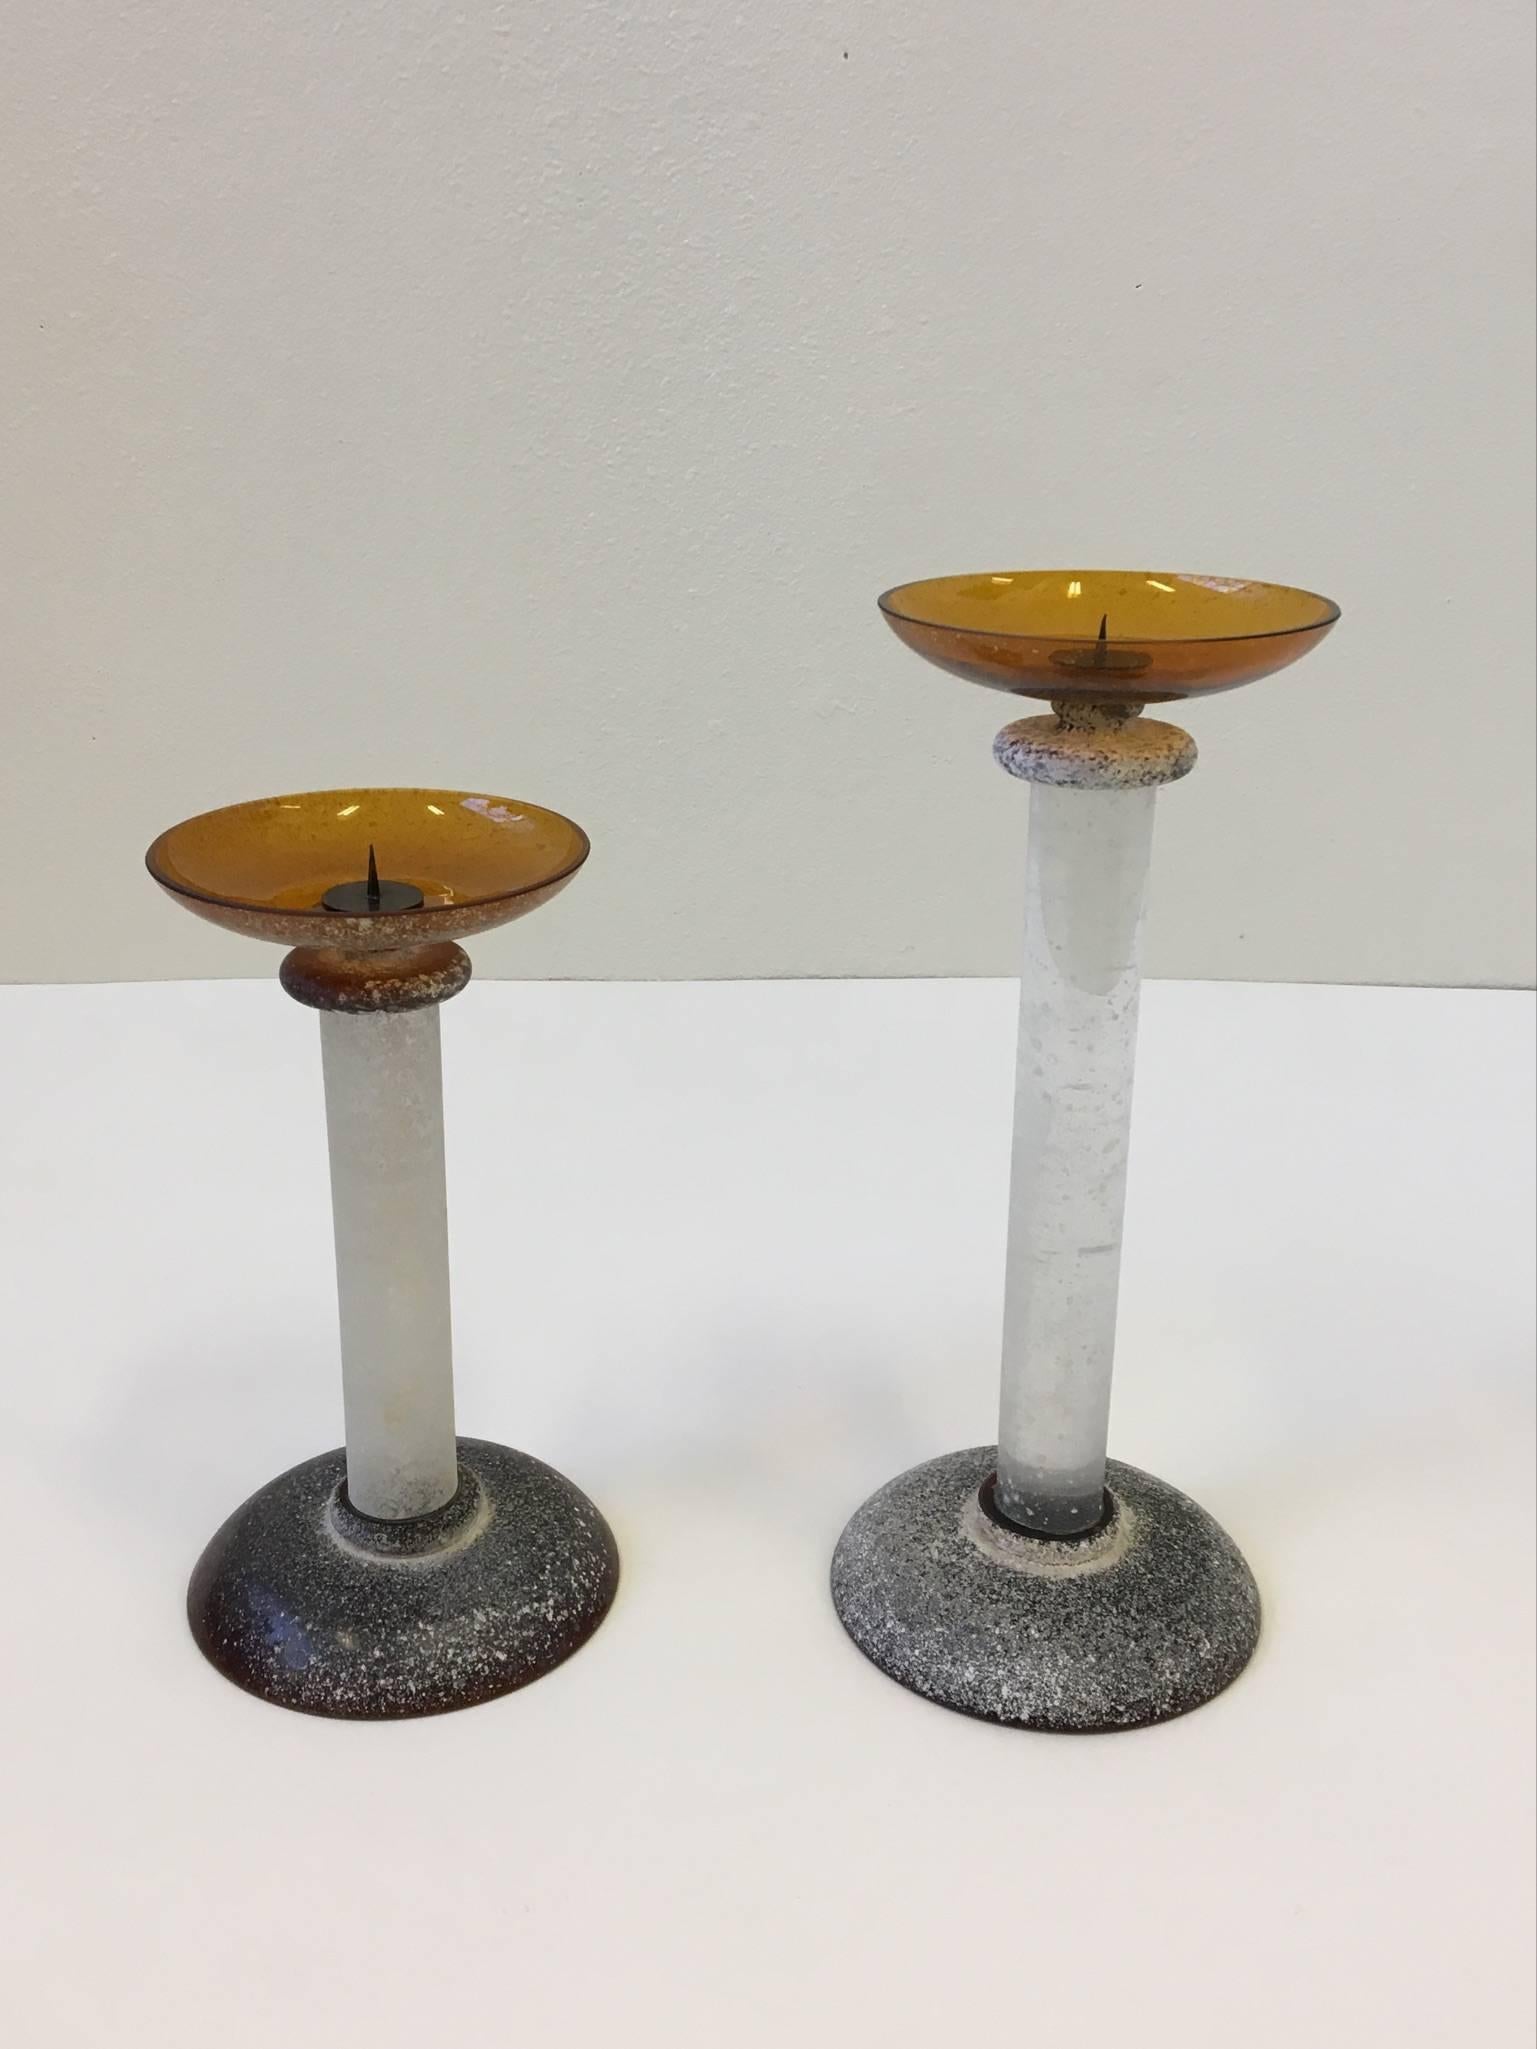 Pair of large-scale Murano glass with a Scavo (textured finish) design by Karl Springer for Seguso in the 1980s.
The small be is signed by Karl Springer (See detail photo)

The the base and candle plate are a amber color and the center is